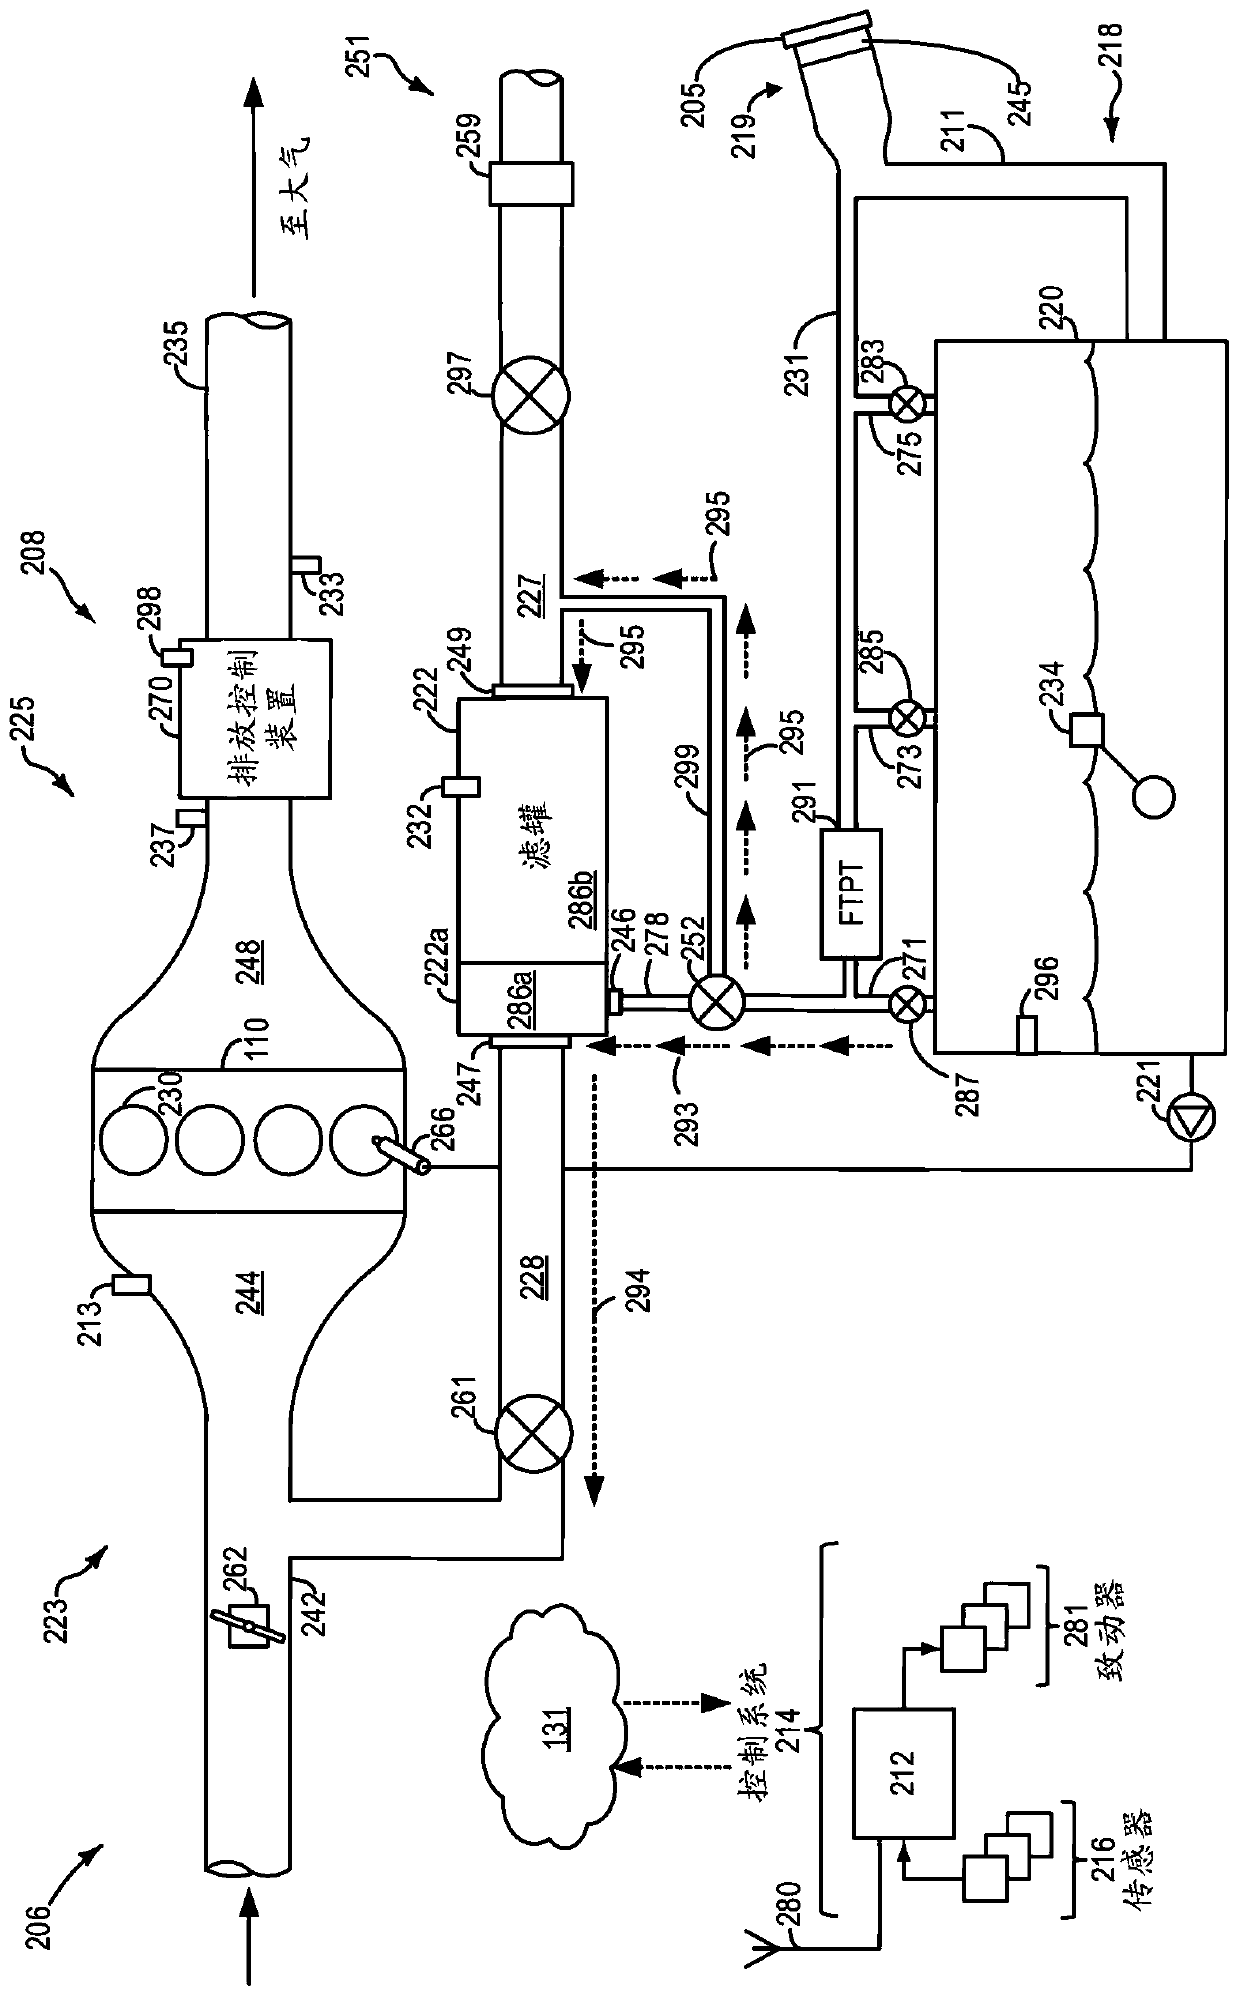 Systems and methods for improving vehicle engine stability